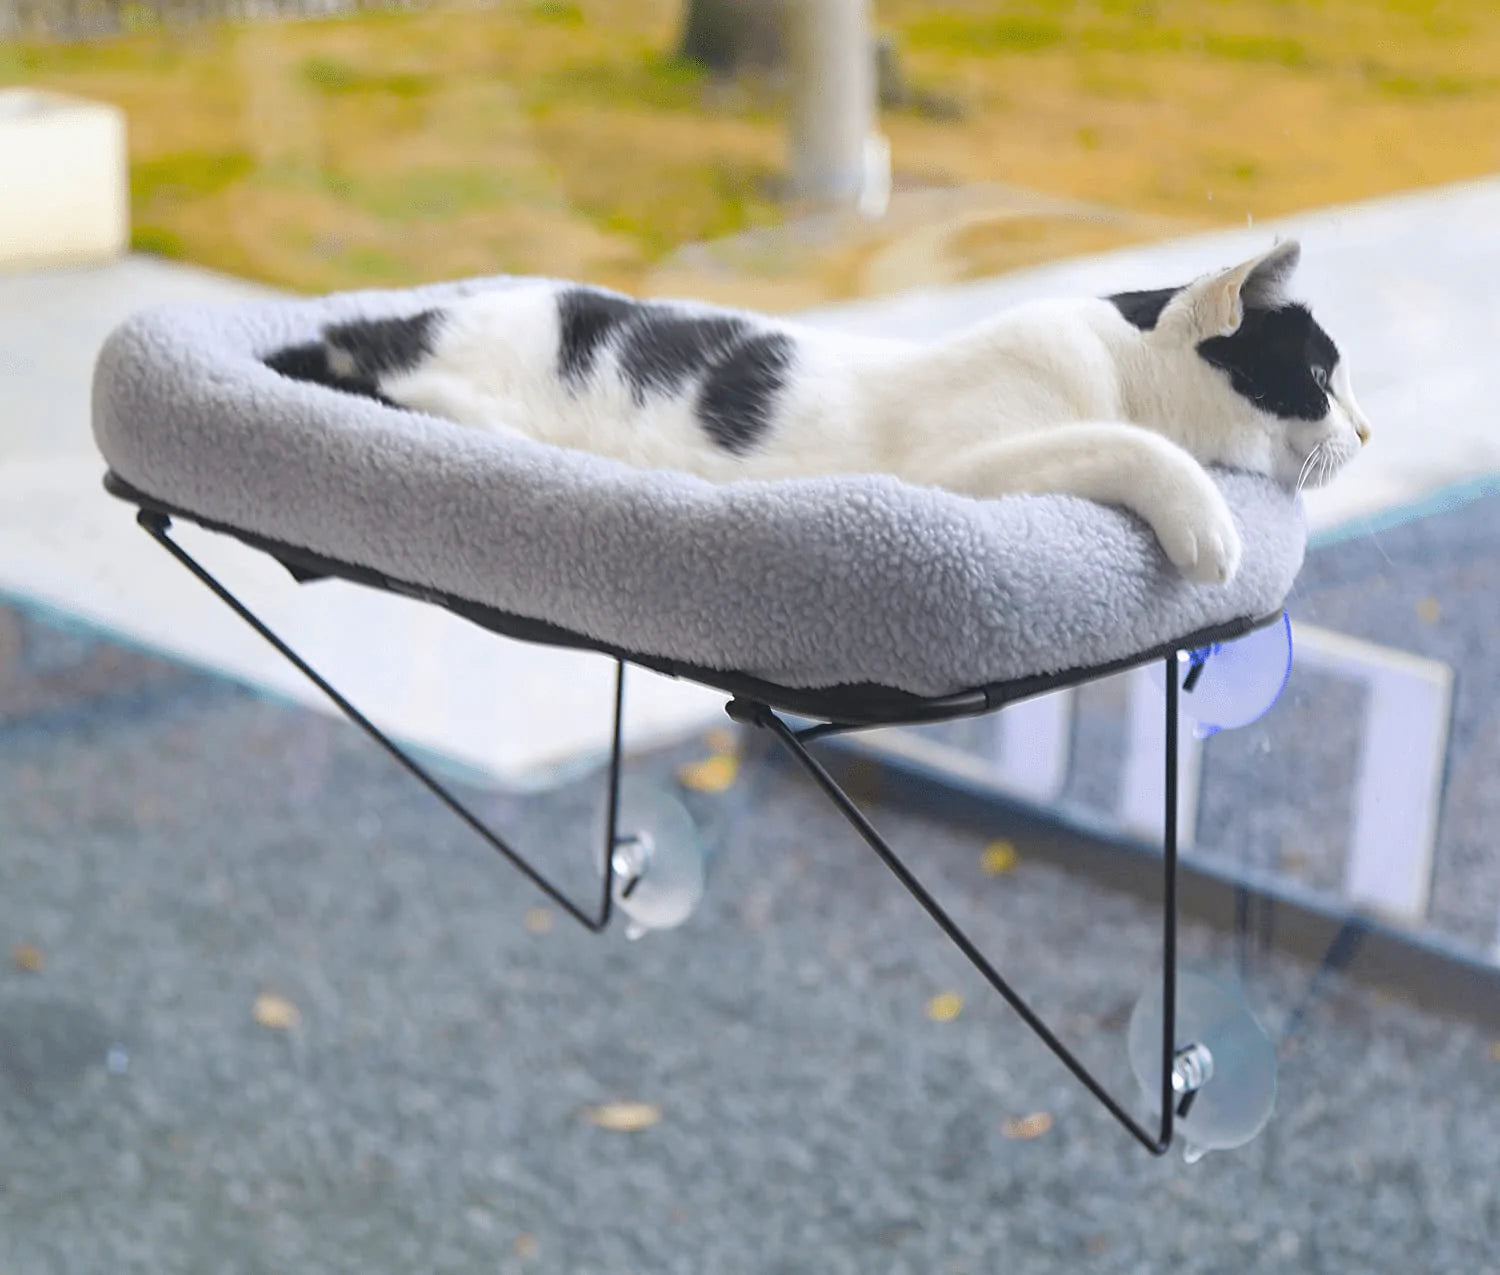 Zakkart Cat Window Perch for Indoor Cats - 100% Metal Supported from below - Comes with Tailored Spacious Pet Bed - Cat Window Hammock for Large Cats & Kittens - for Sunbathing, Napping & Overlooking